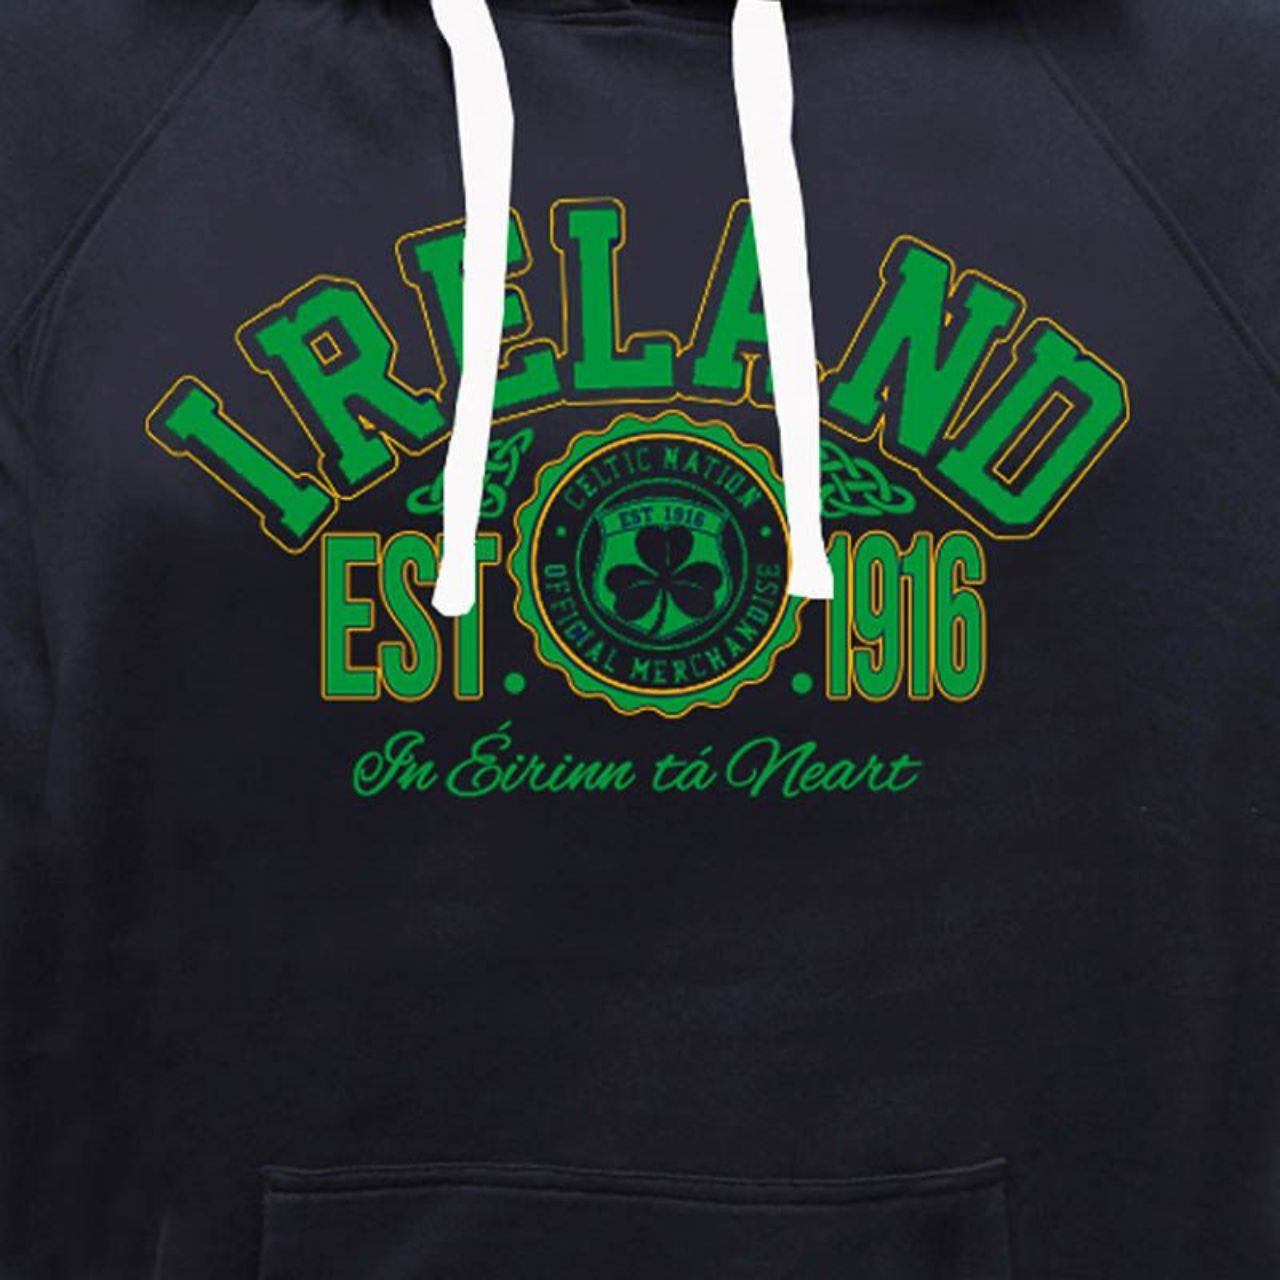 This hoodie is part of the official Traditional Craft Collection. It features a relaxed fit and a printed design of Ireland. Celtic Nation logo and 'Est. 1916'. It also has a double side front pocket for your convenience.